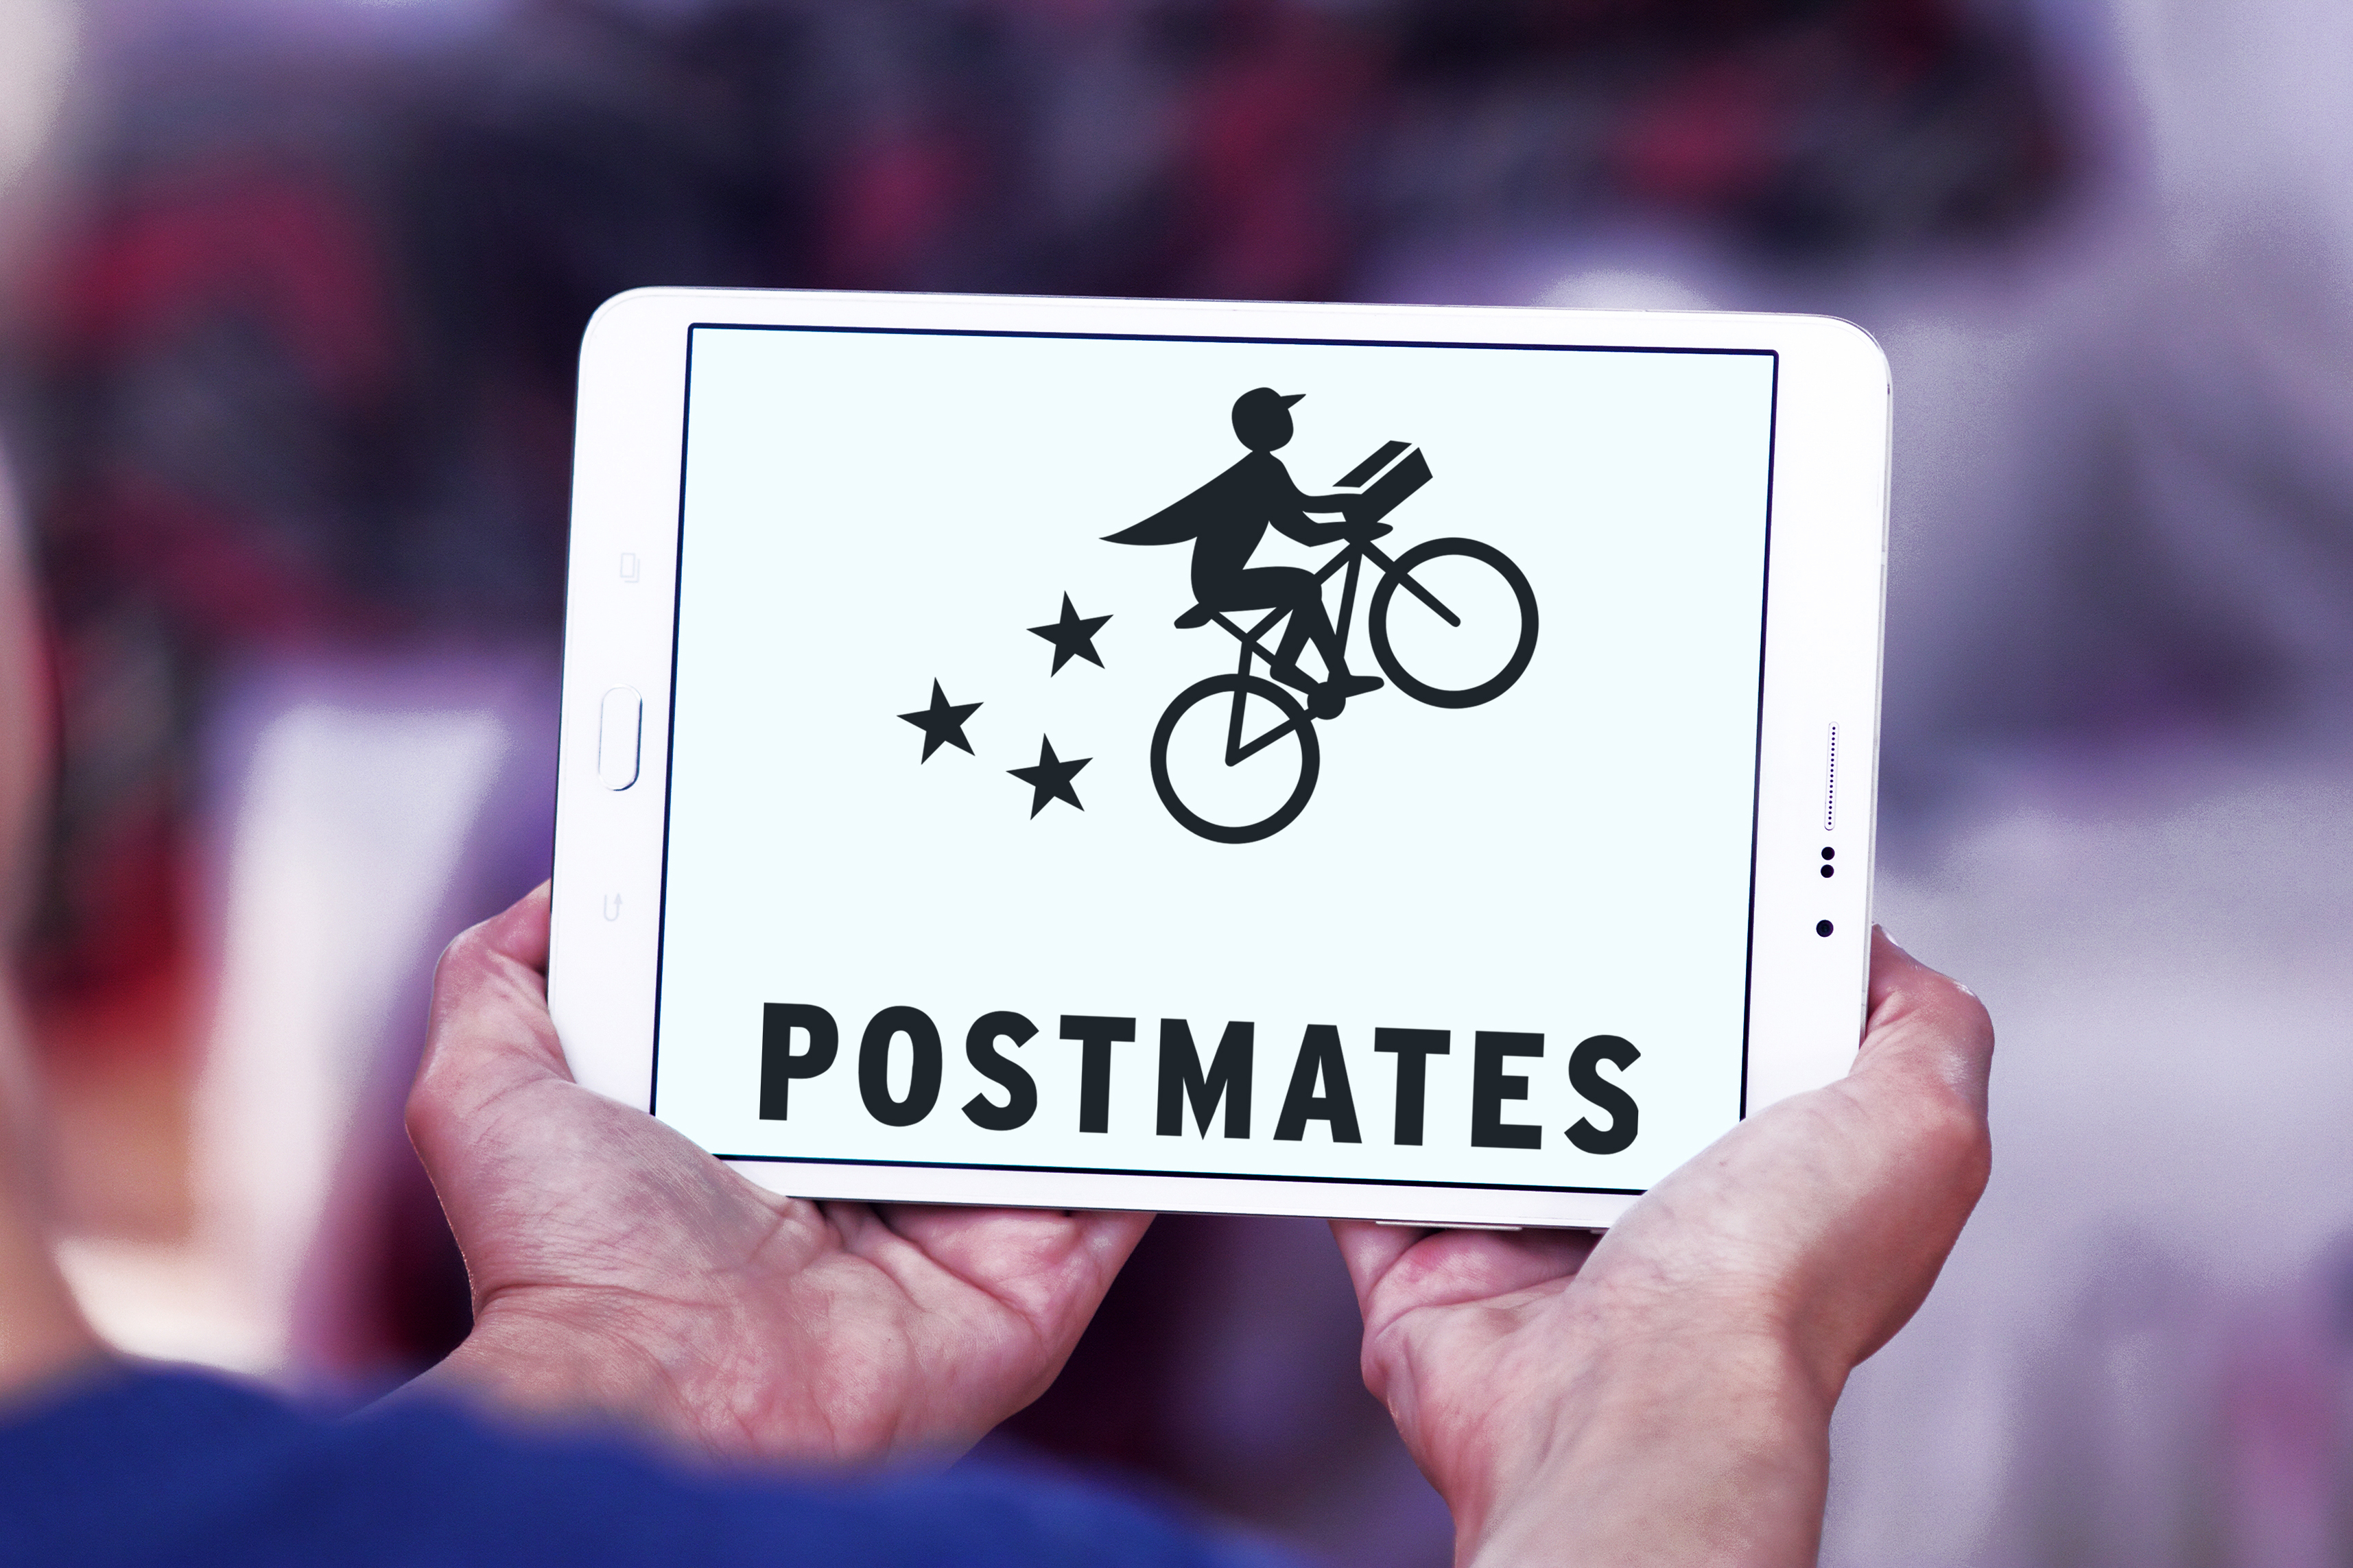 Postmates promo code: Get a 30-day FREE trial of Postmates Unlimited